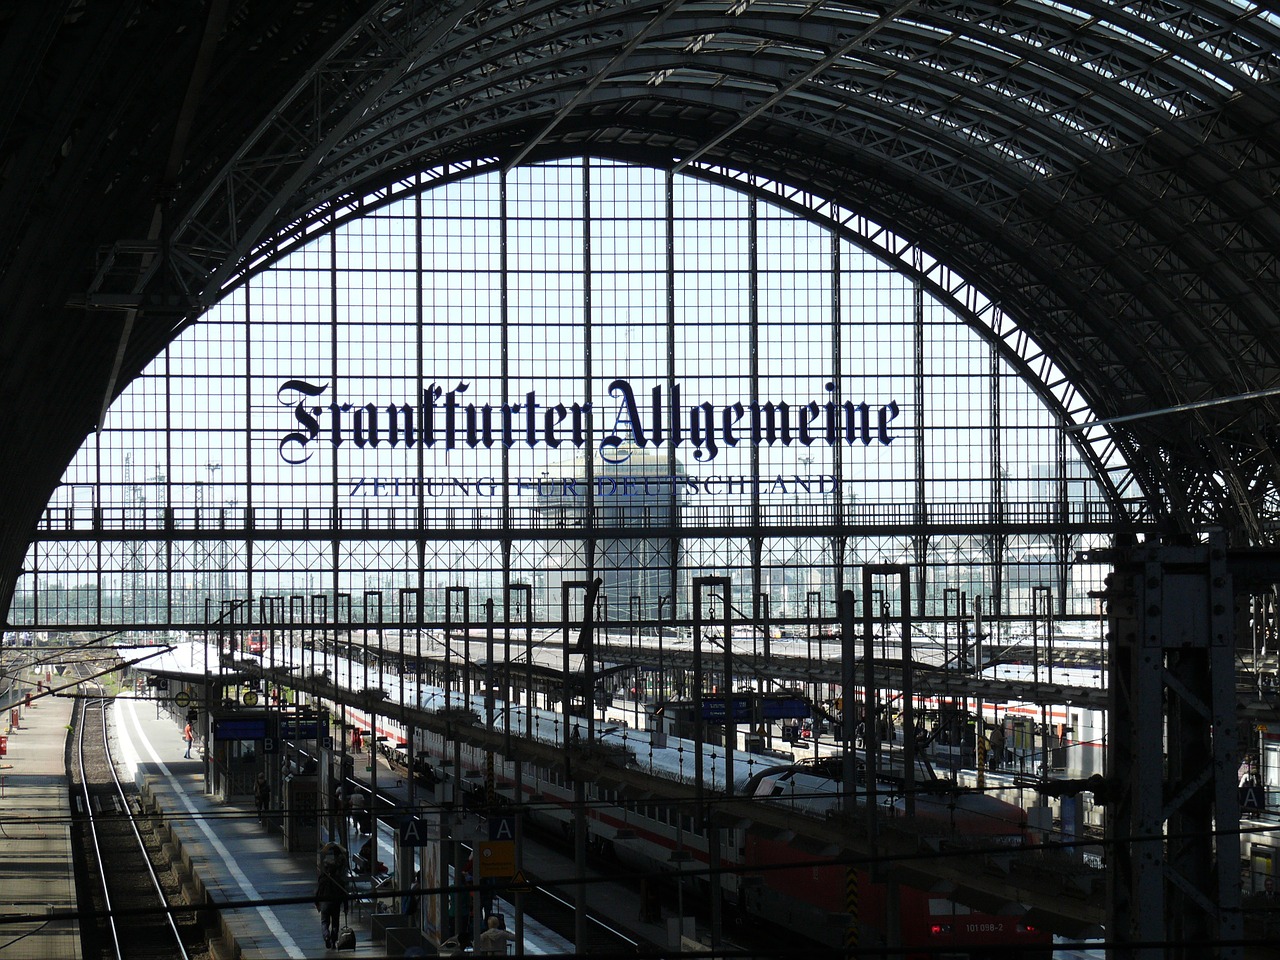 Railway Station Germany Taking the Train in Europe